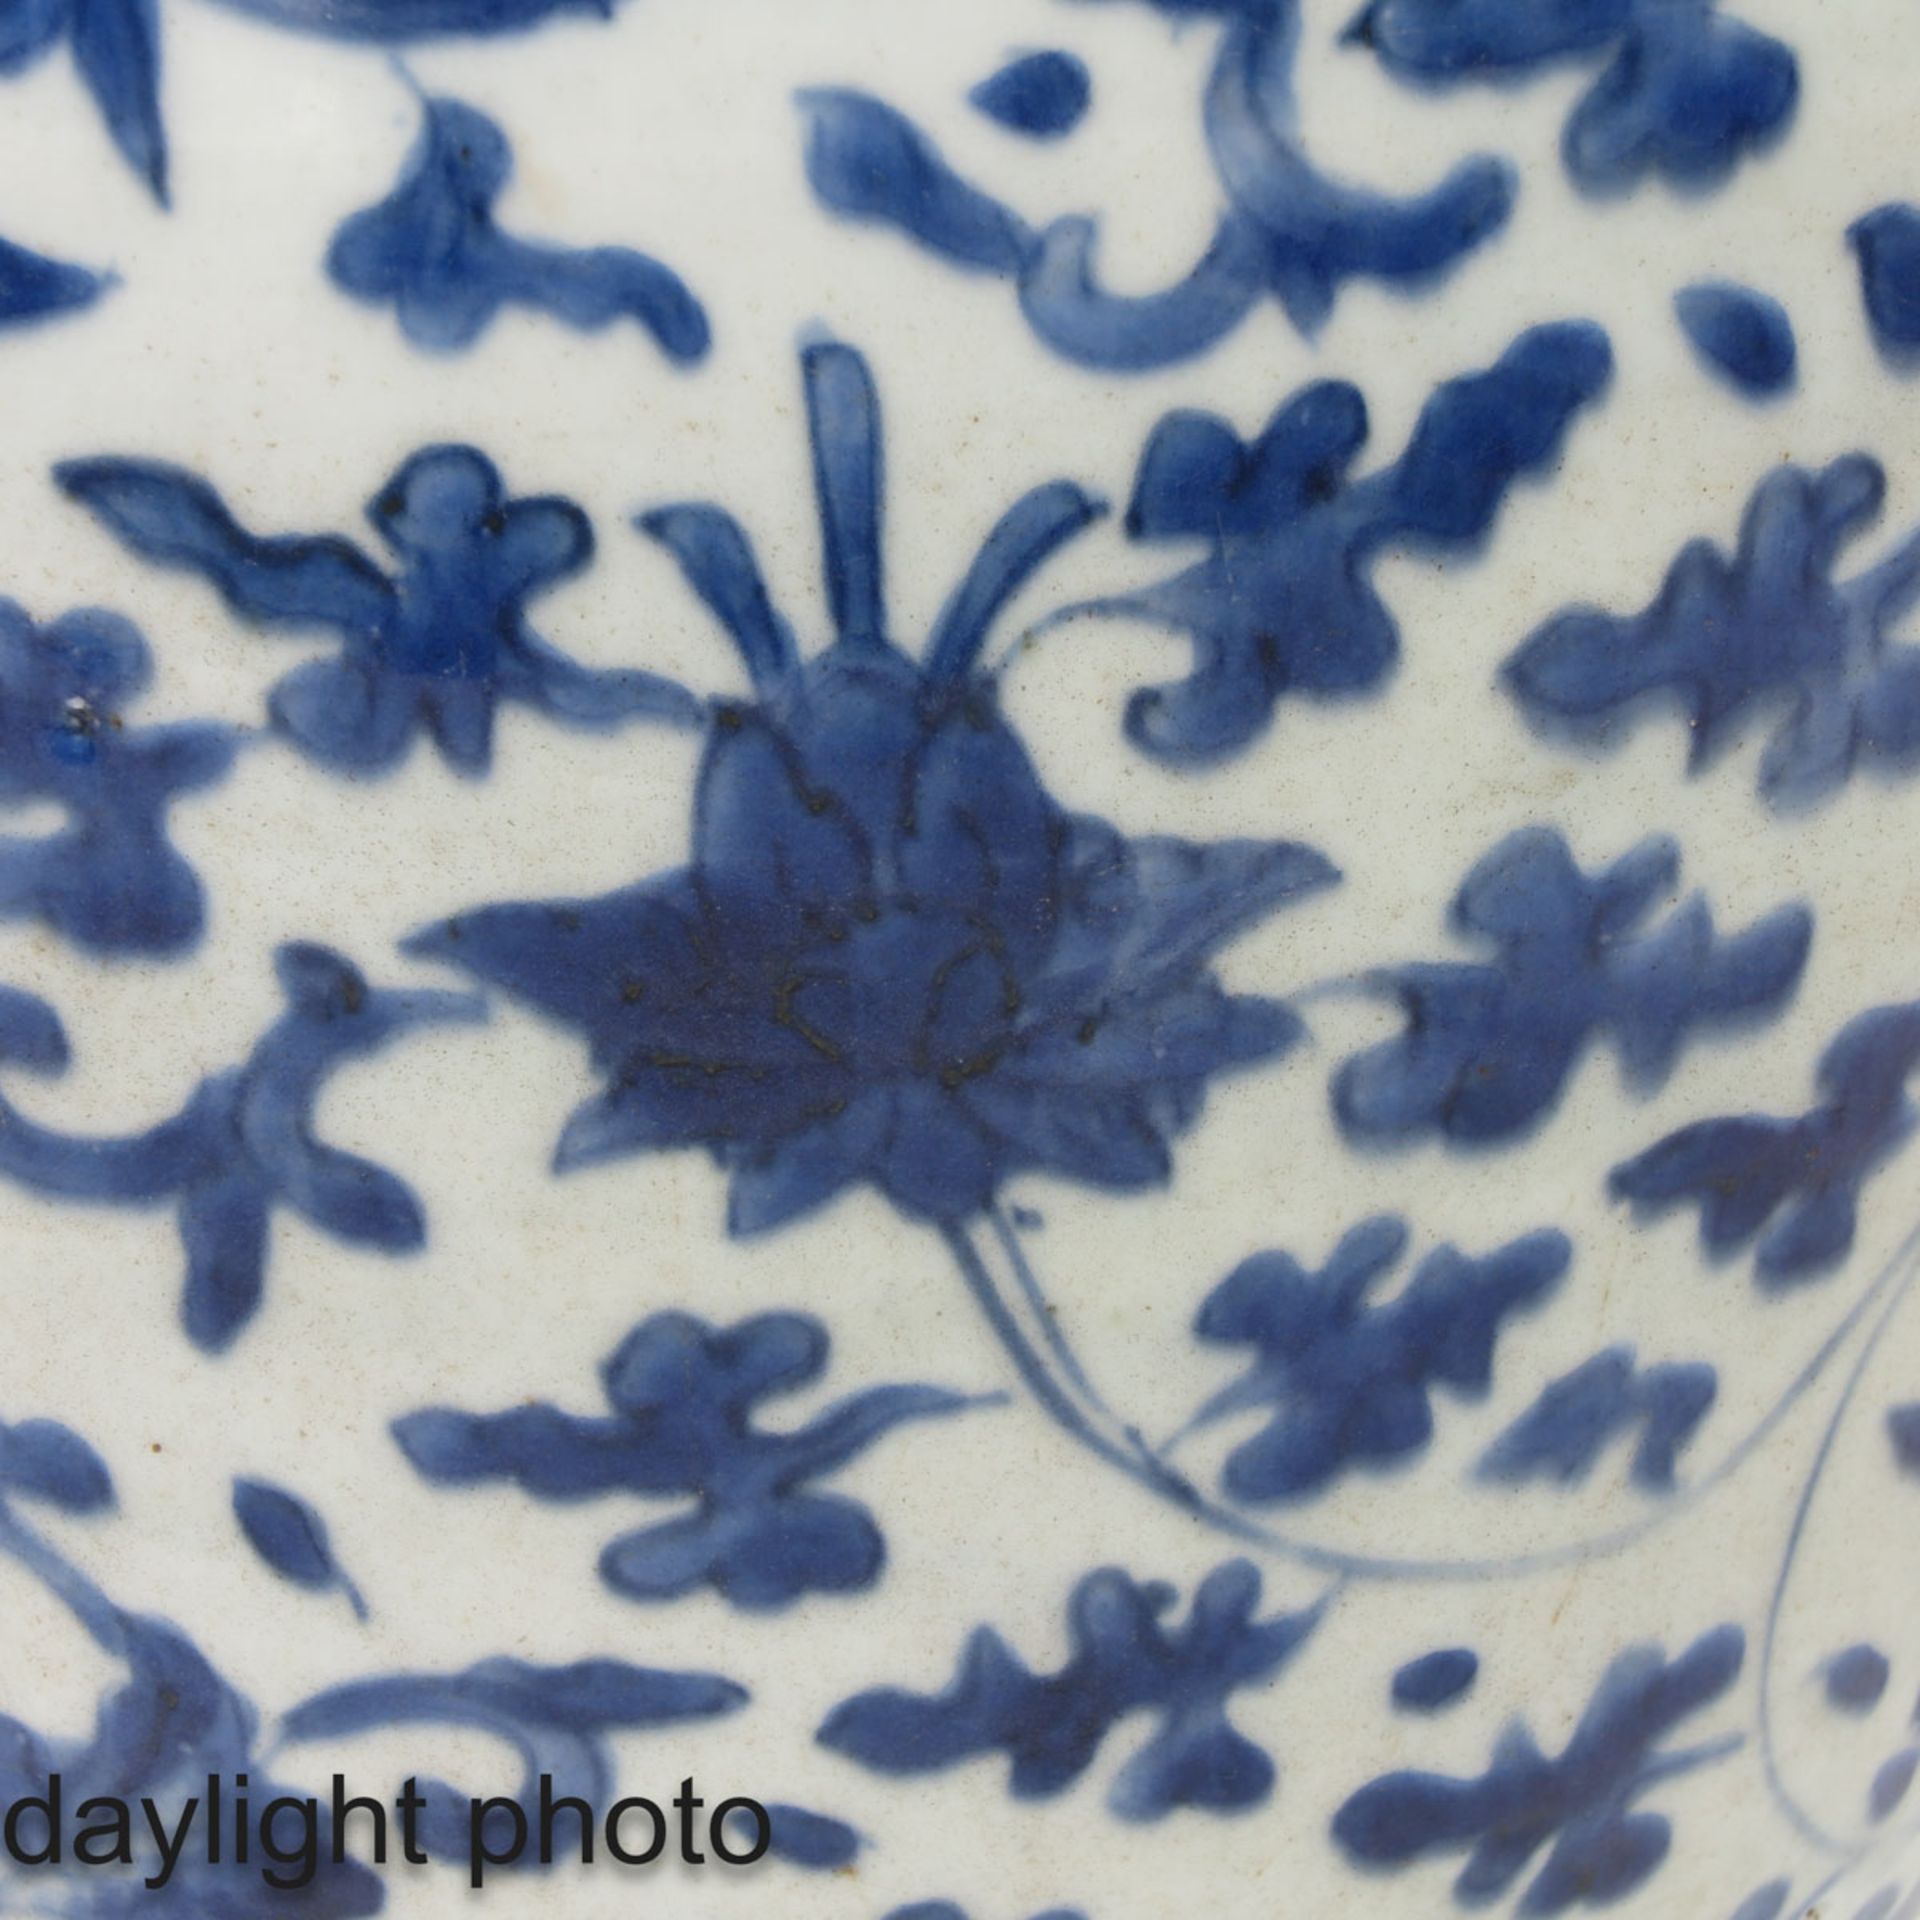 A Blue and White Ginger Jar - Image 9 of 9